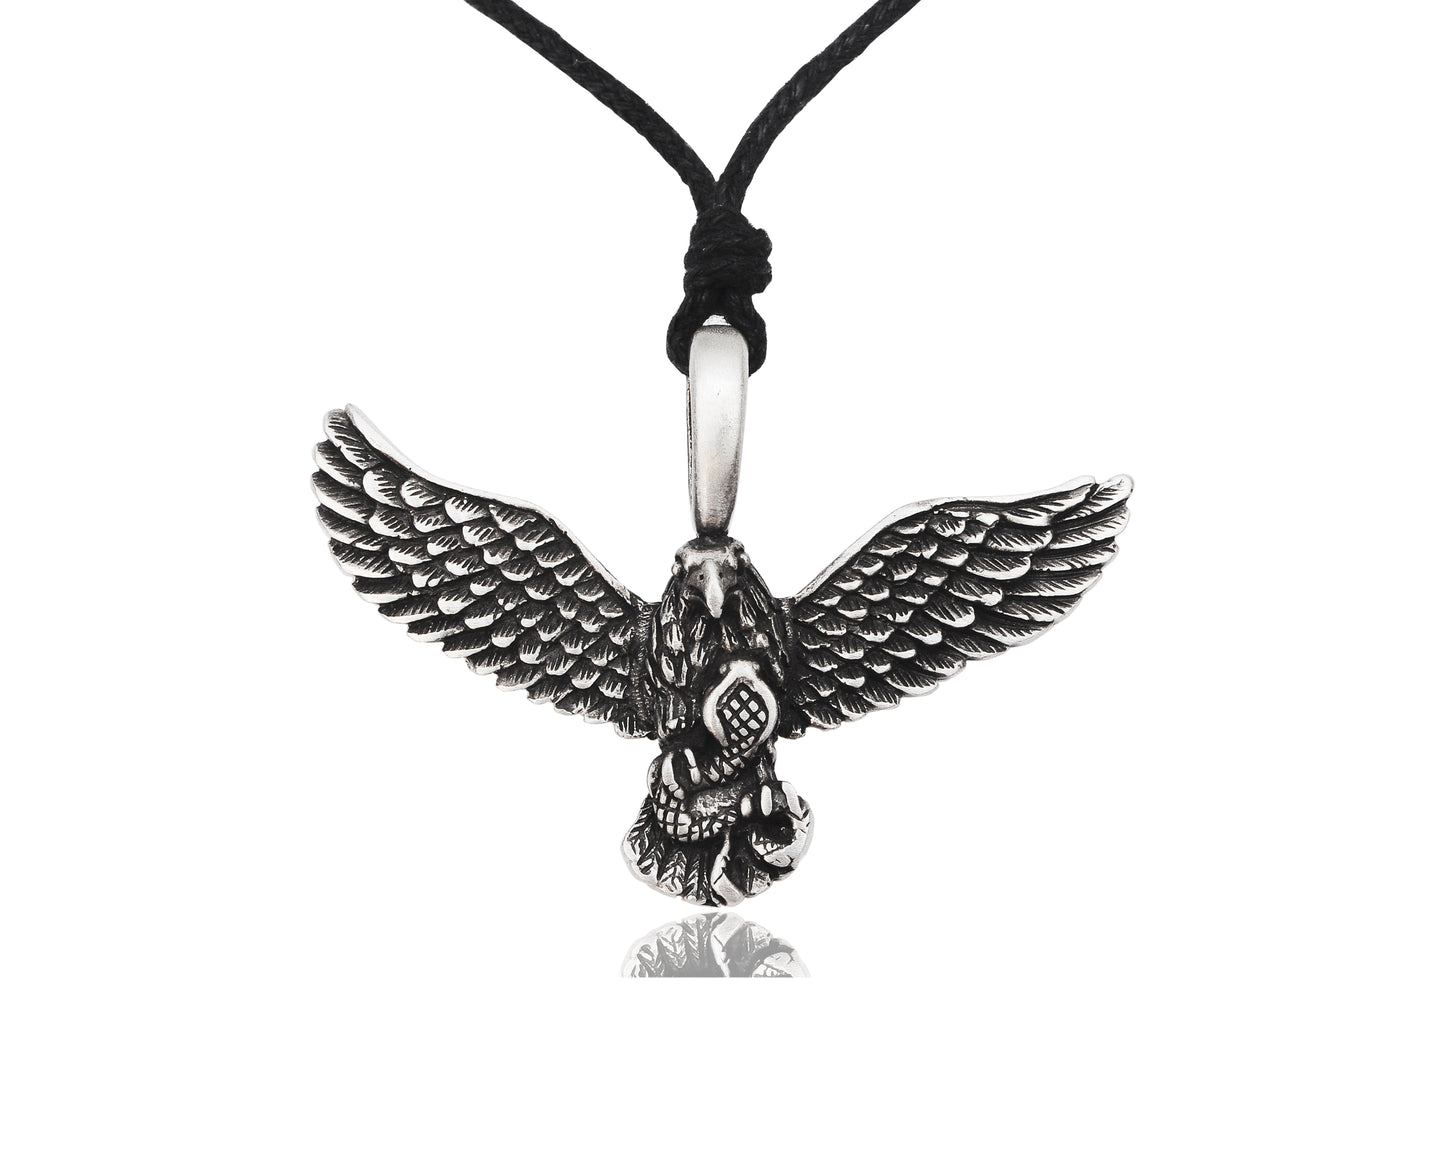 Eagle Hawk Catching Snake Silver Pewter Charm Necklace Pendant Jewelry